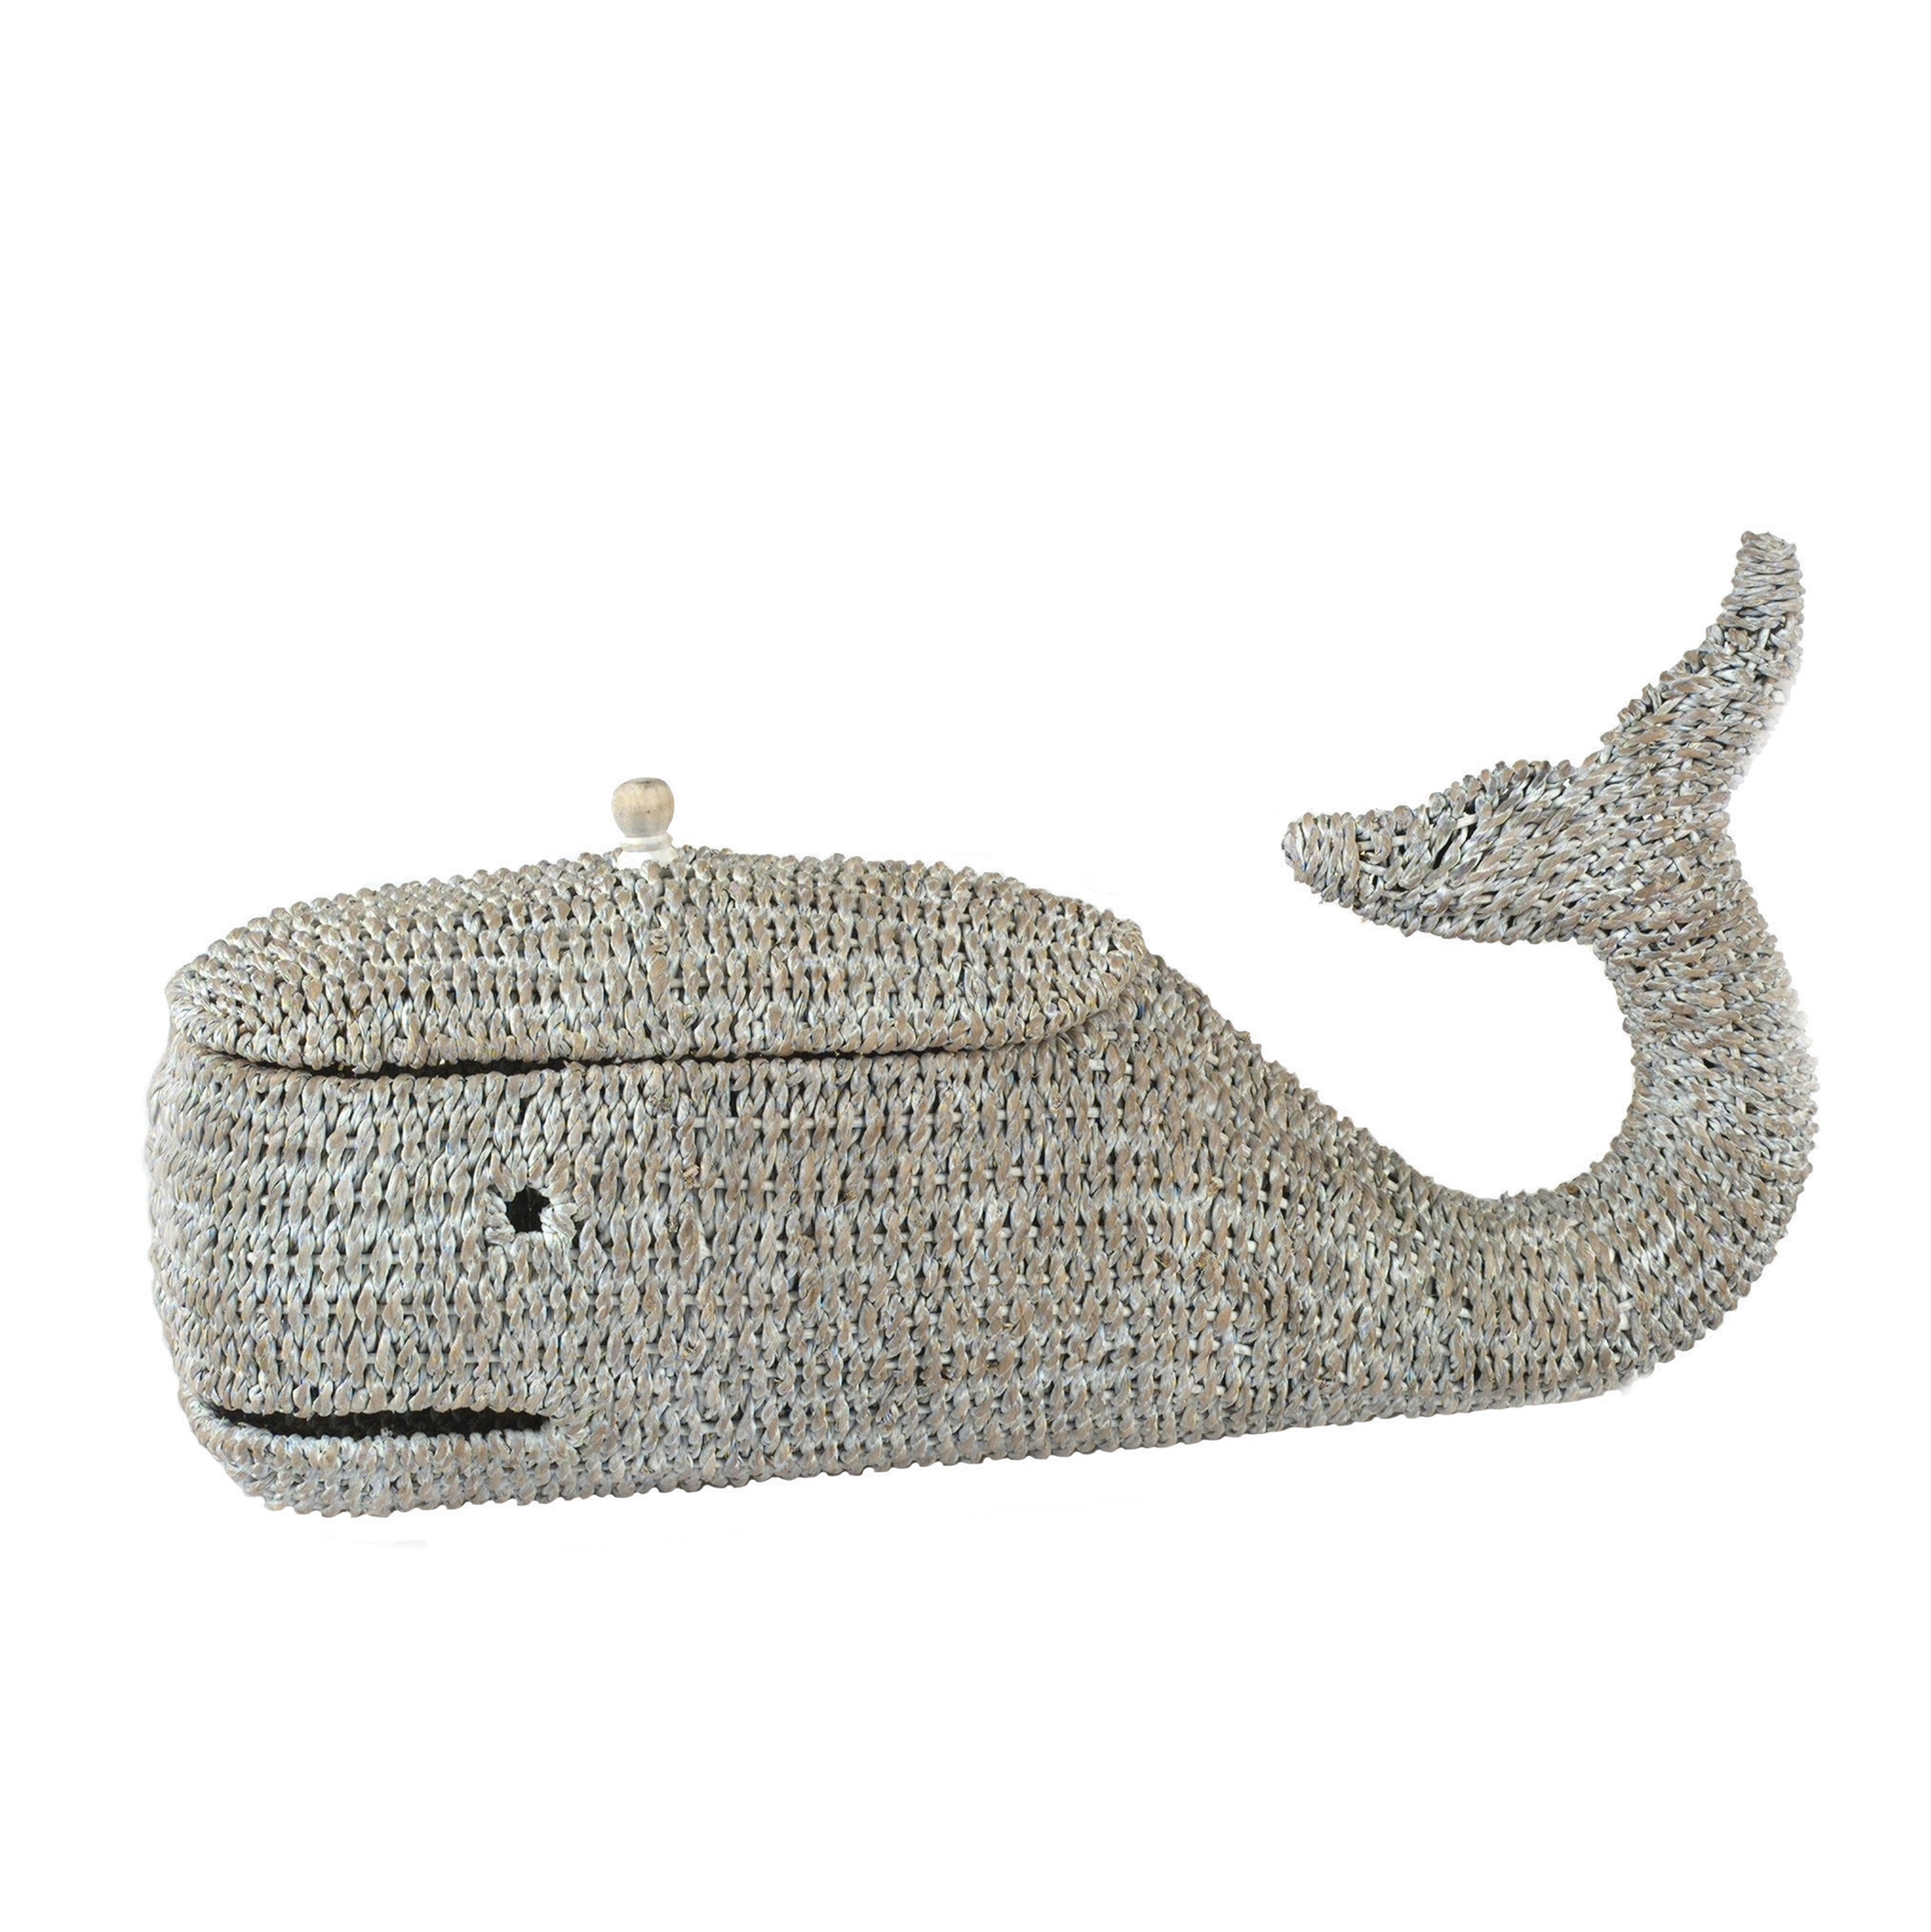 Bankuan Rope Whale Box with Lid - Image 0